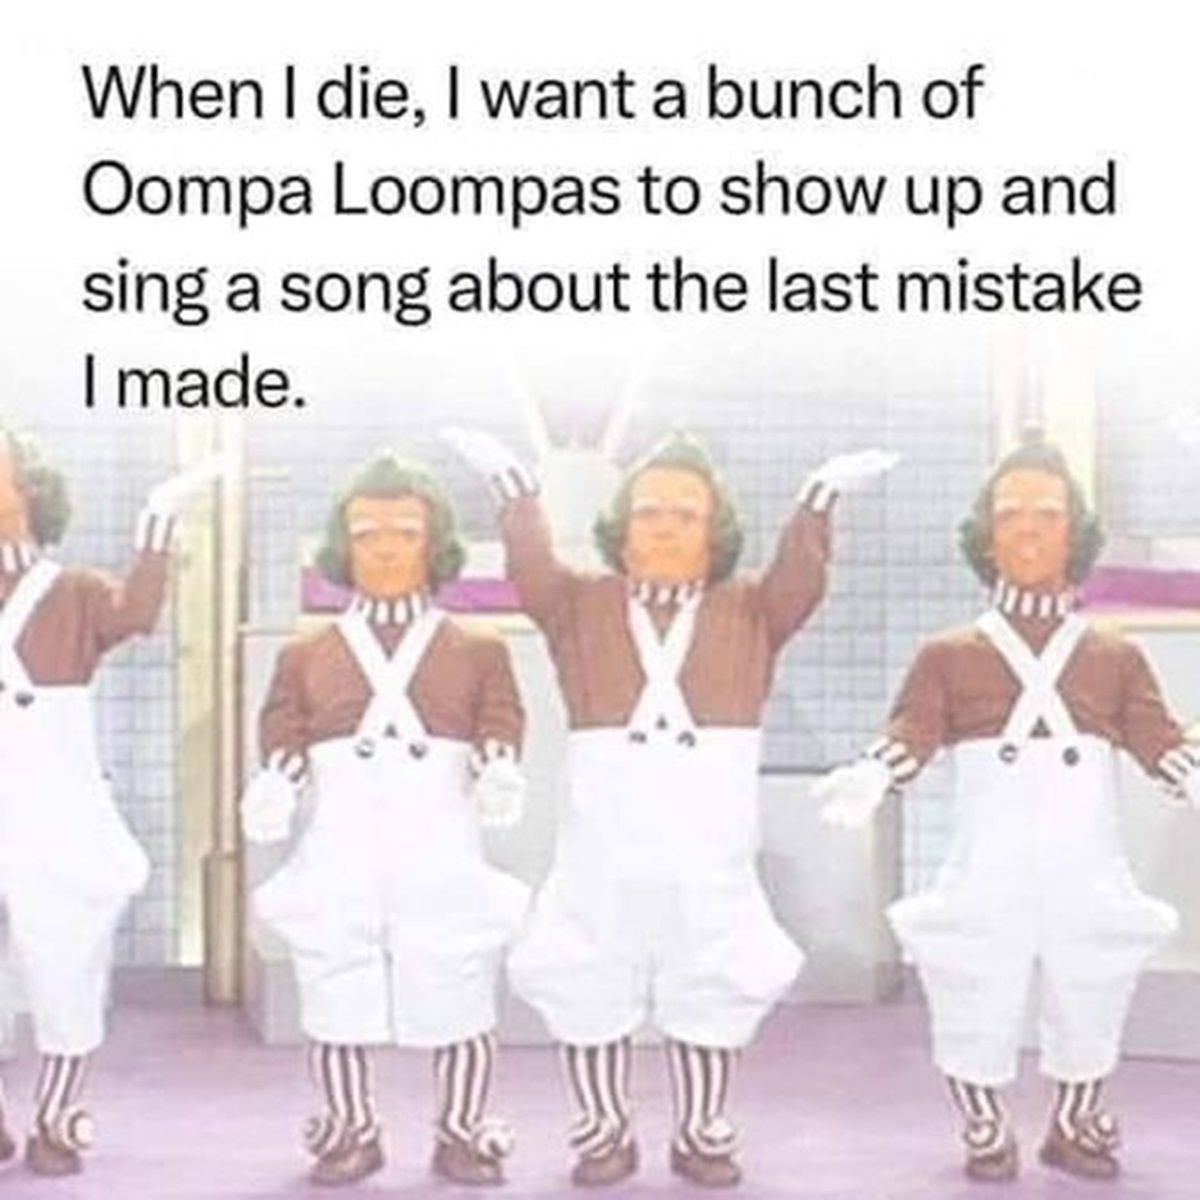 Oompa Loompa - When I die, I want a bunch of Oompa Loompas to show up and sing a song about the last mistake I made. me